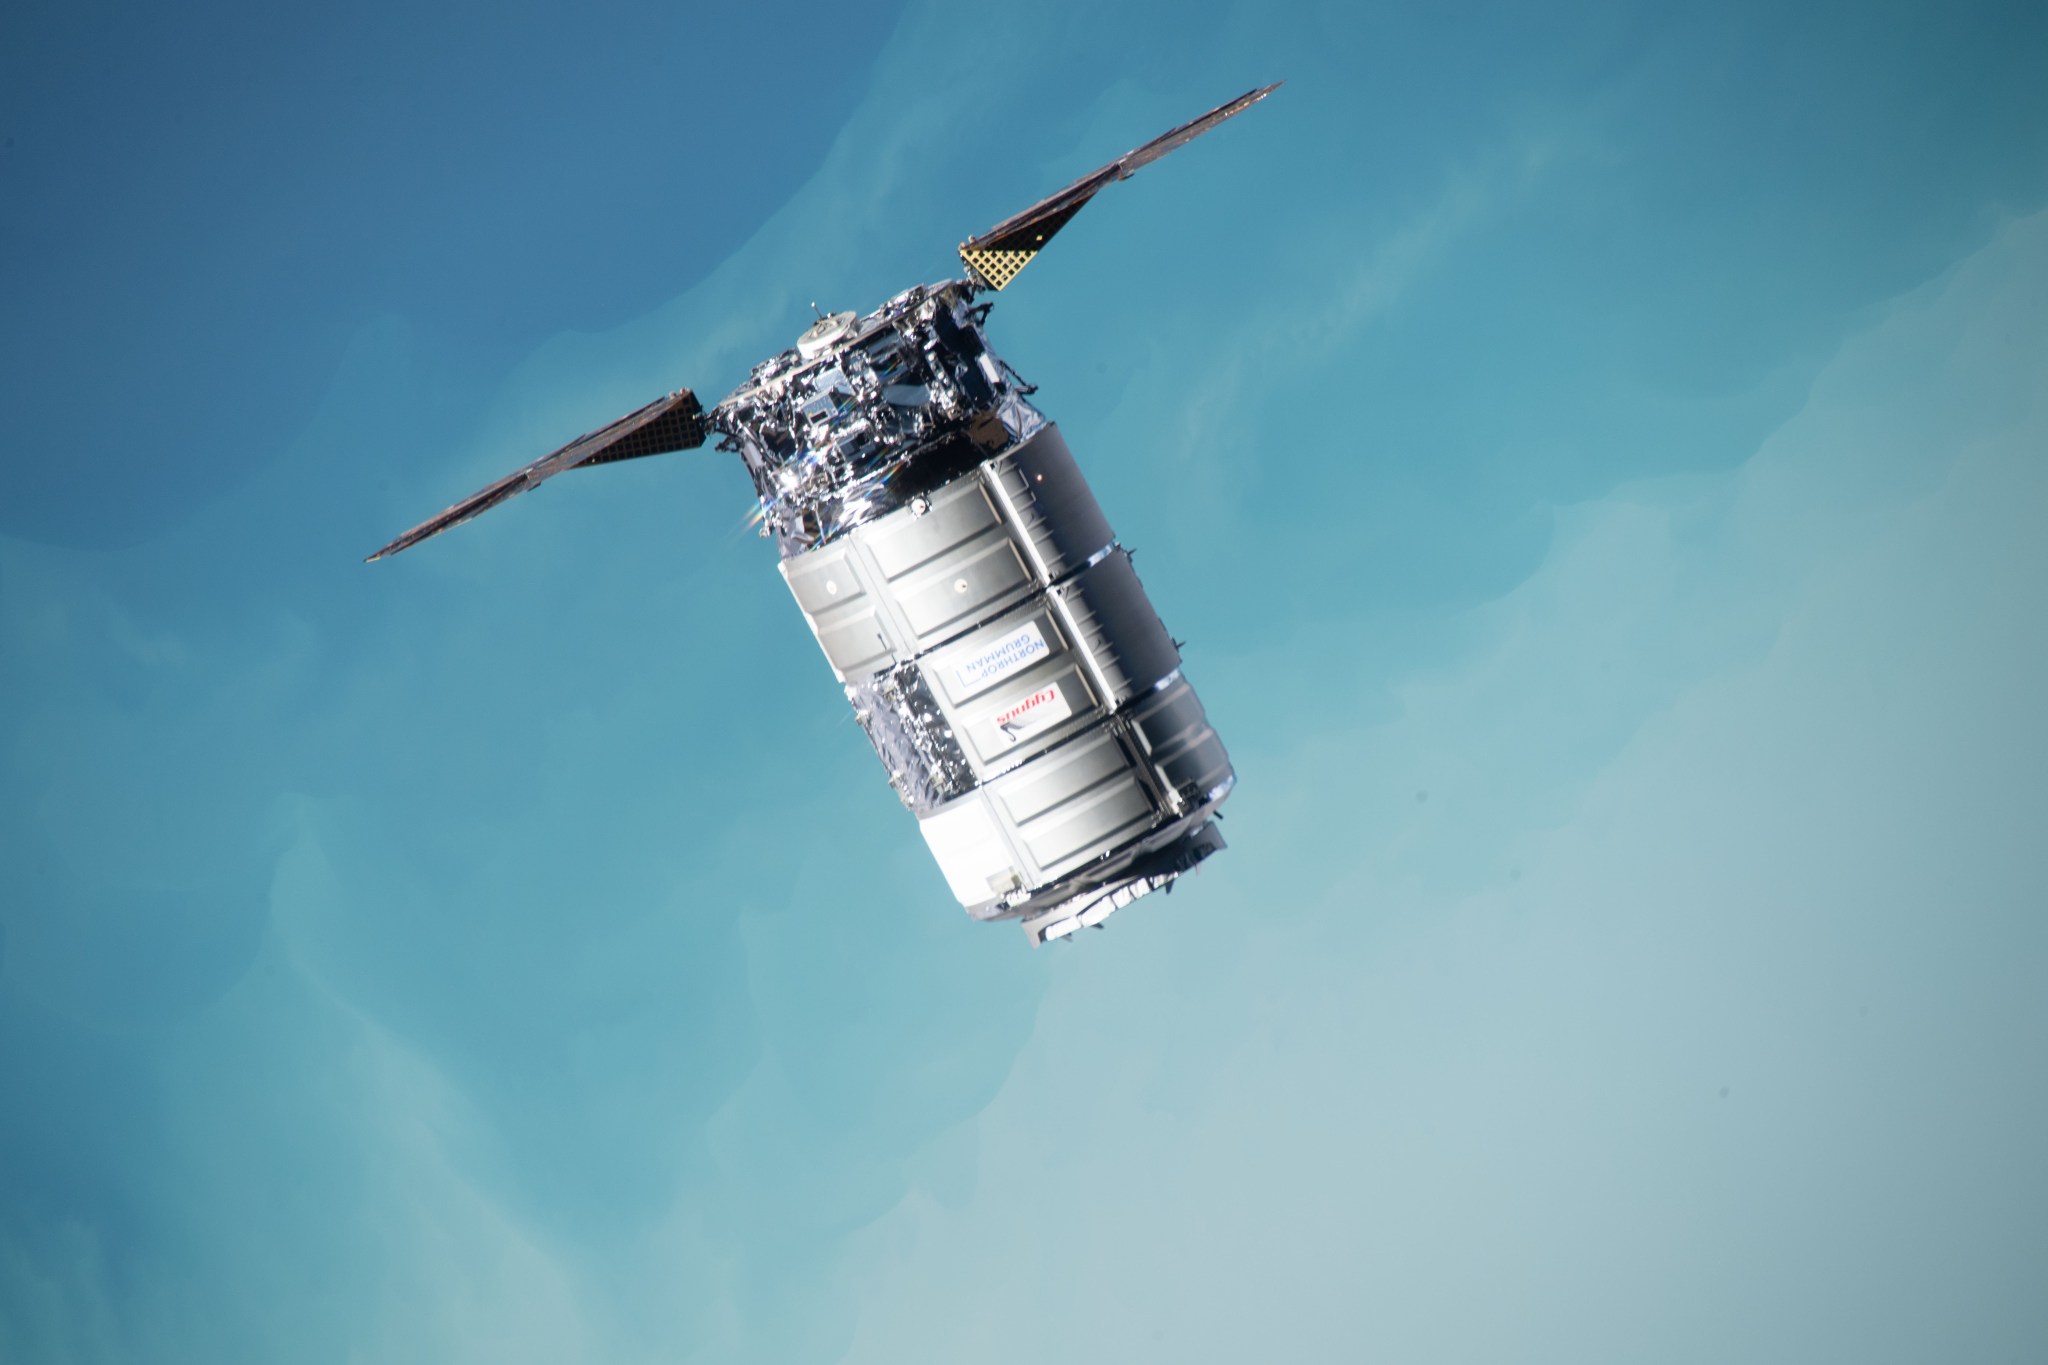 The silver, cylindrical spacecraft is labelled “Cygnus” in red letters and “Northrop Grumman” in blue letters. It has exposed machinery on one end and two solar panels extending like arms on either side of that. In the background is the pale blue Pacific Ocean on Earth below.